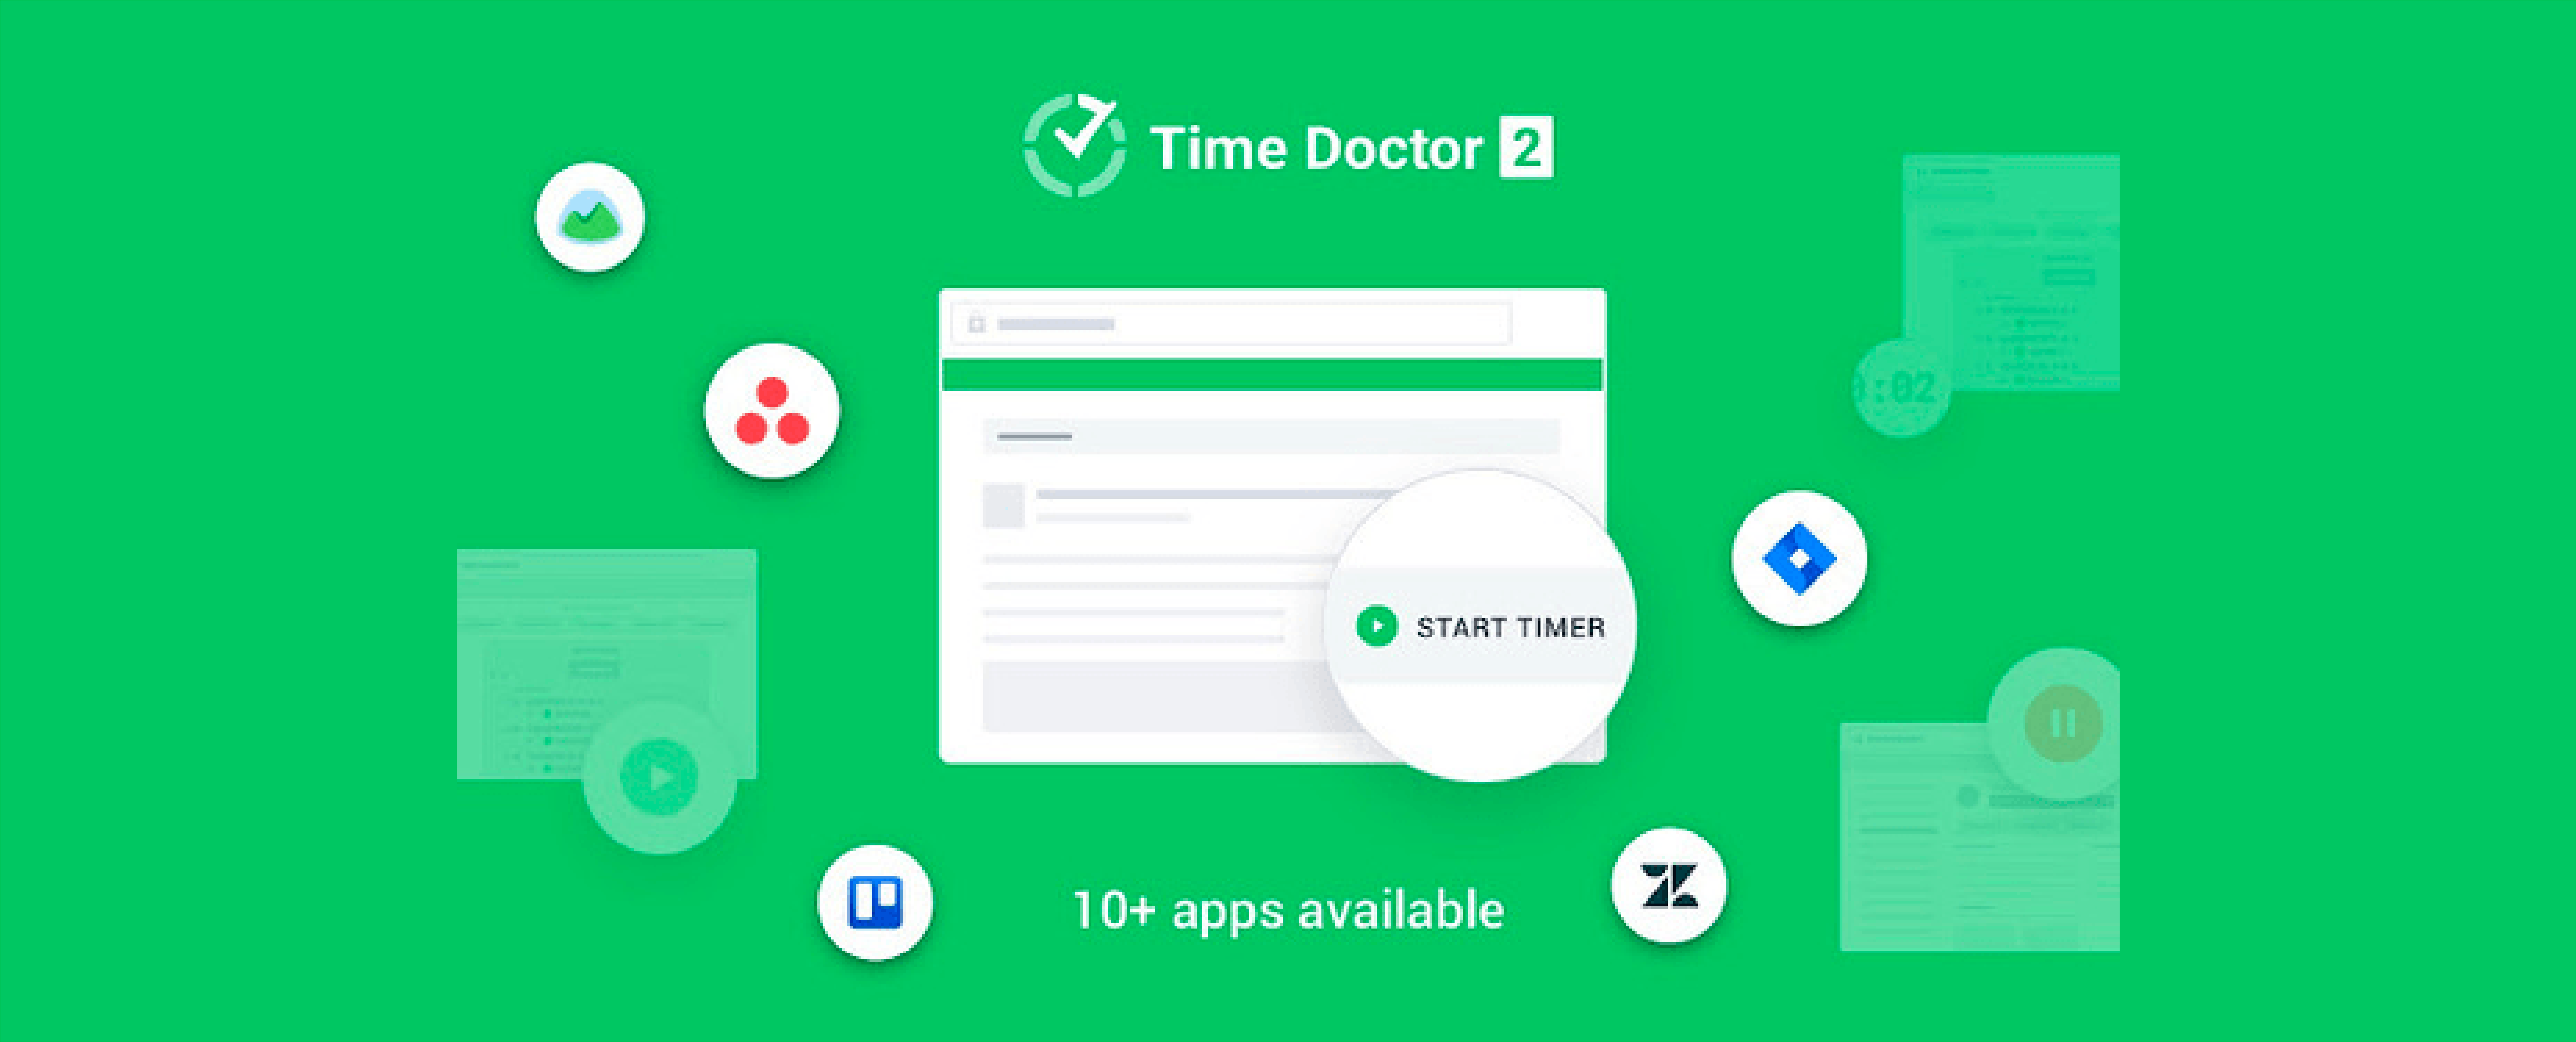 time doctor not working